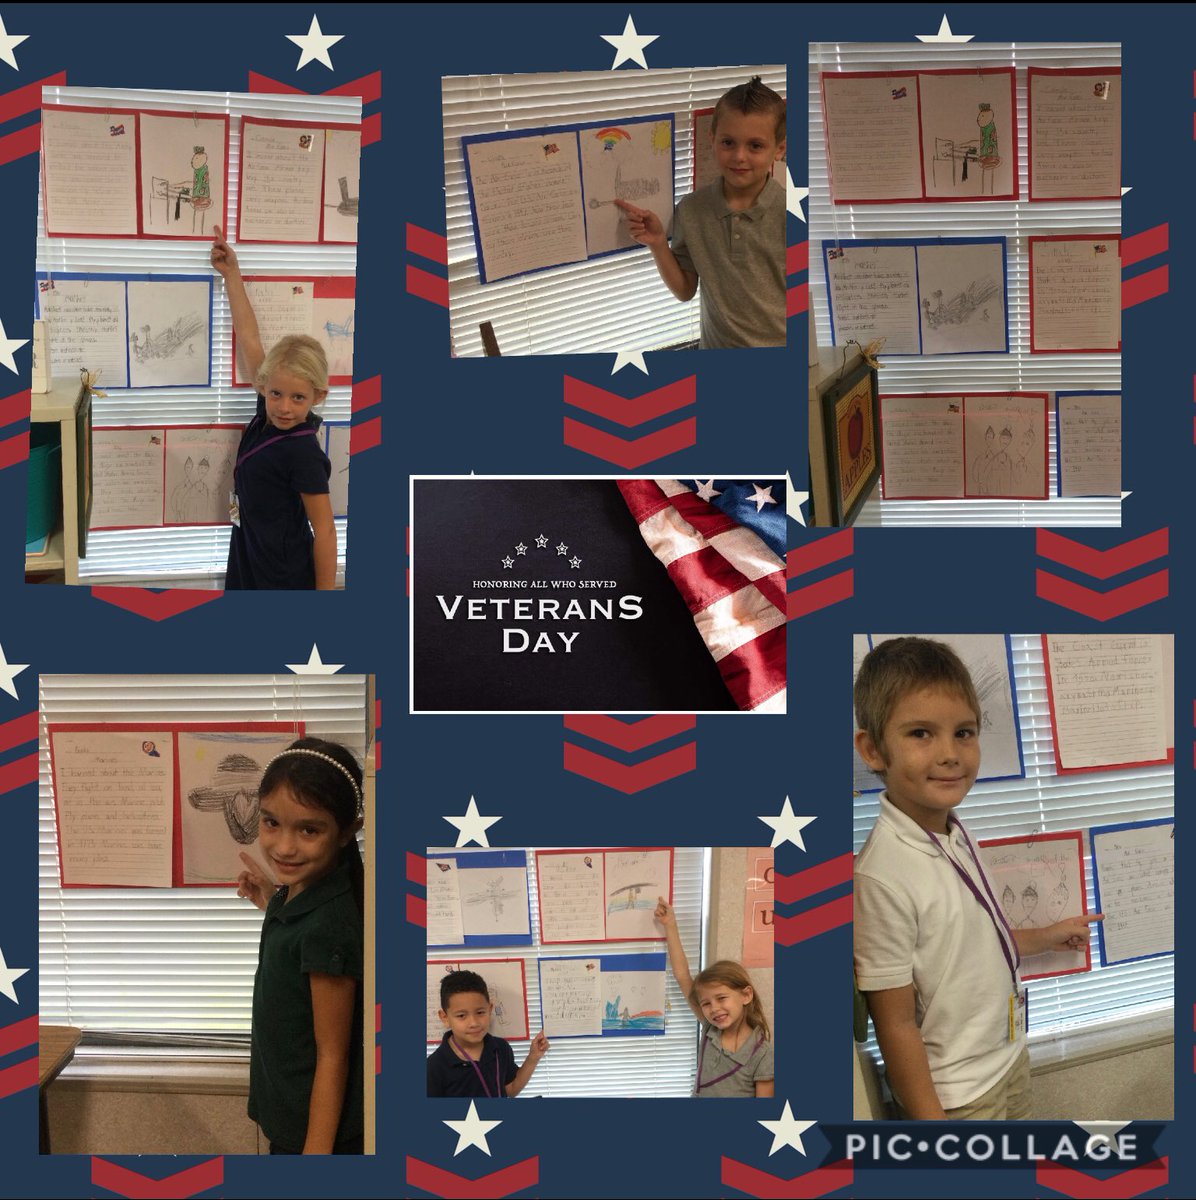 Students chose which branch of the Armed Forces to research and write about. Many thanks to the Veterans of our great country!